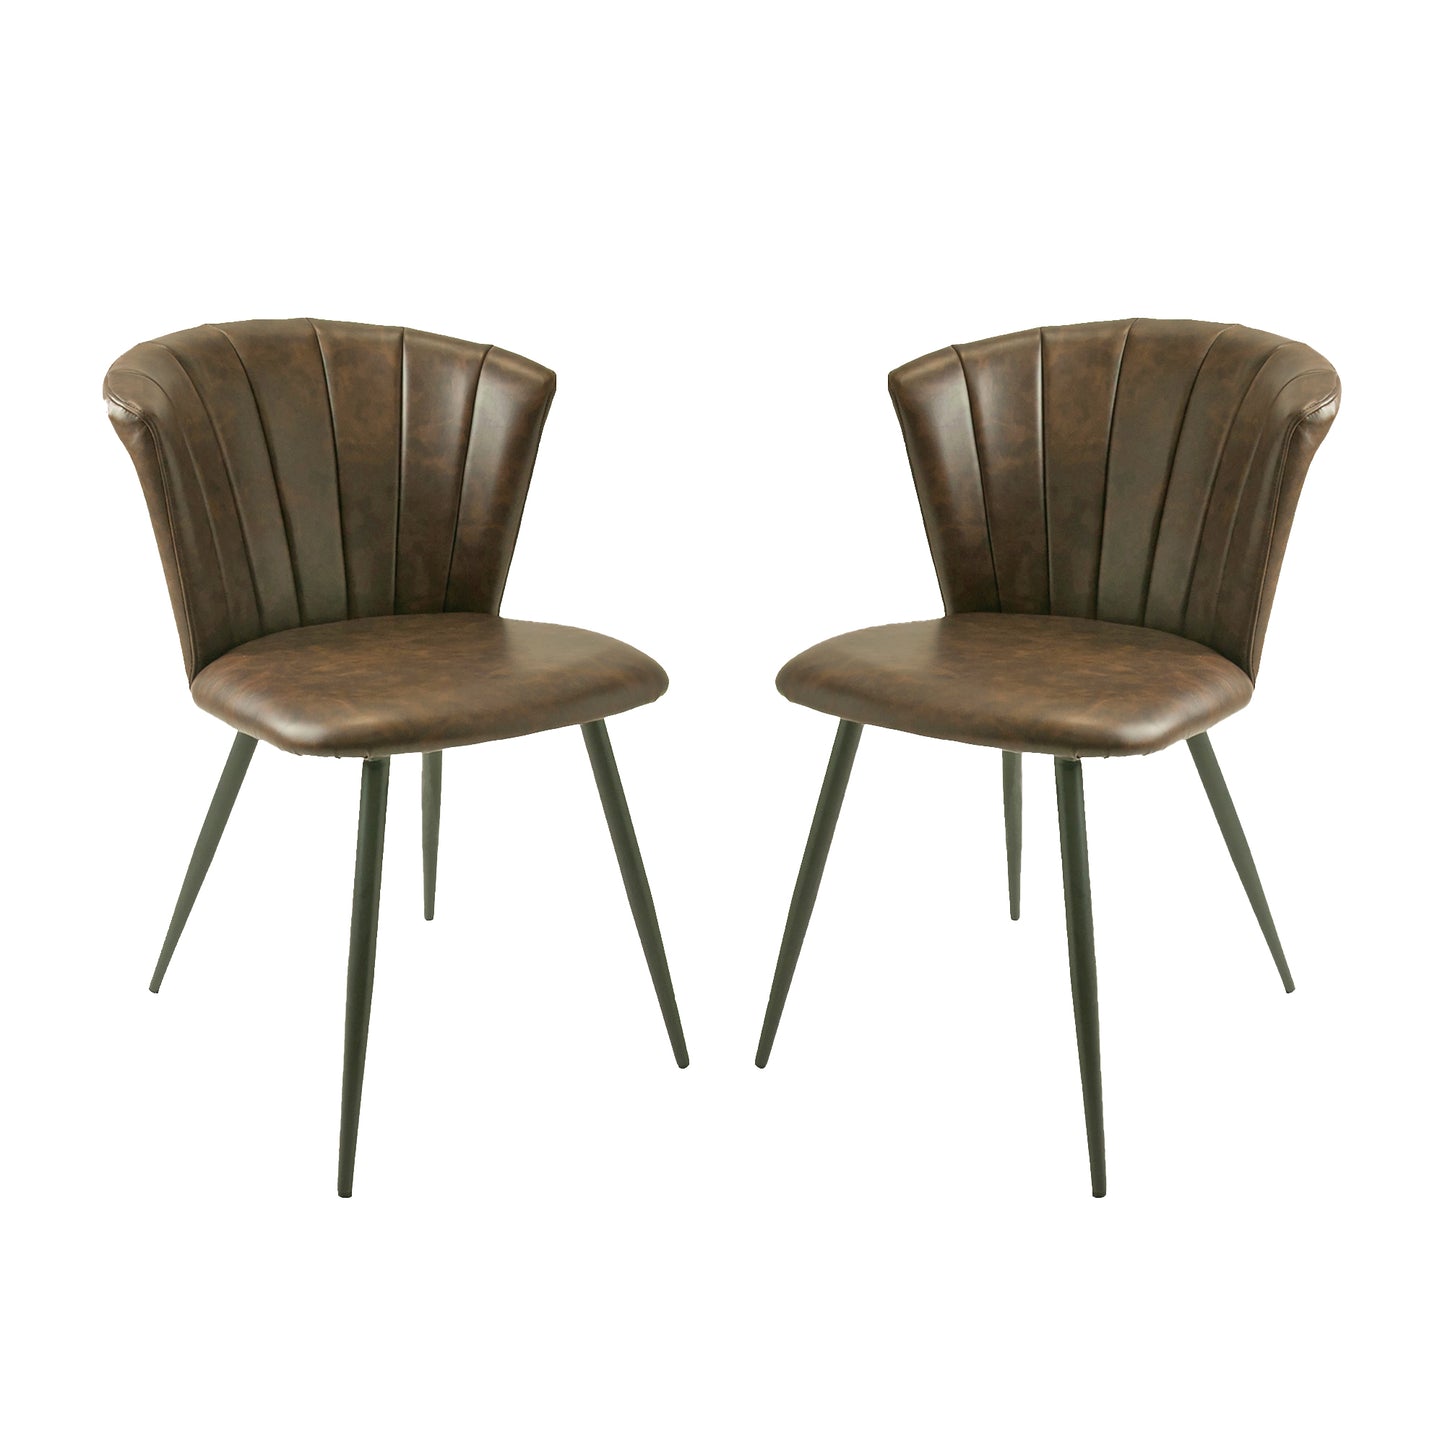 Pair of Chestnut Brown Shelby Dining Chairs